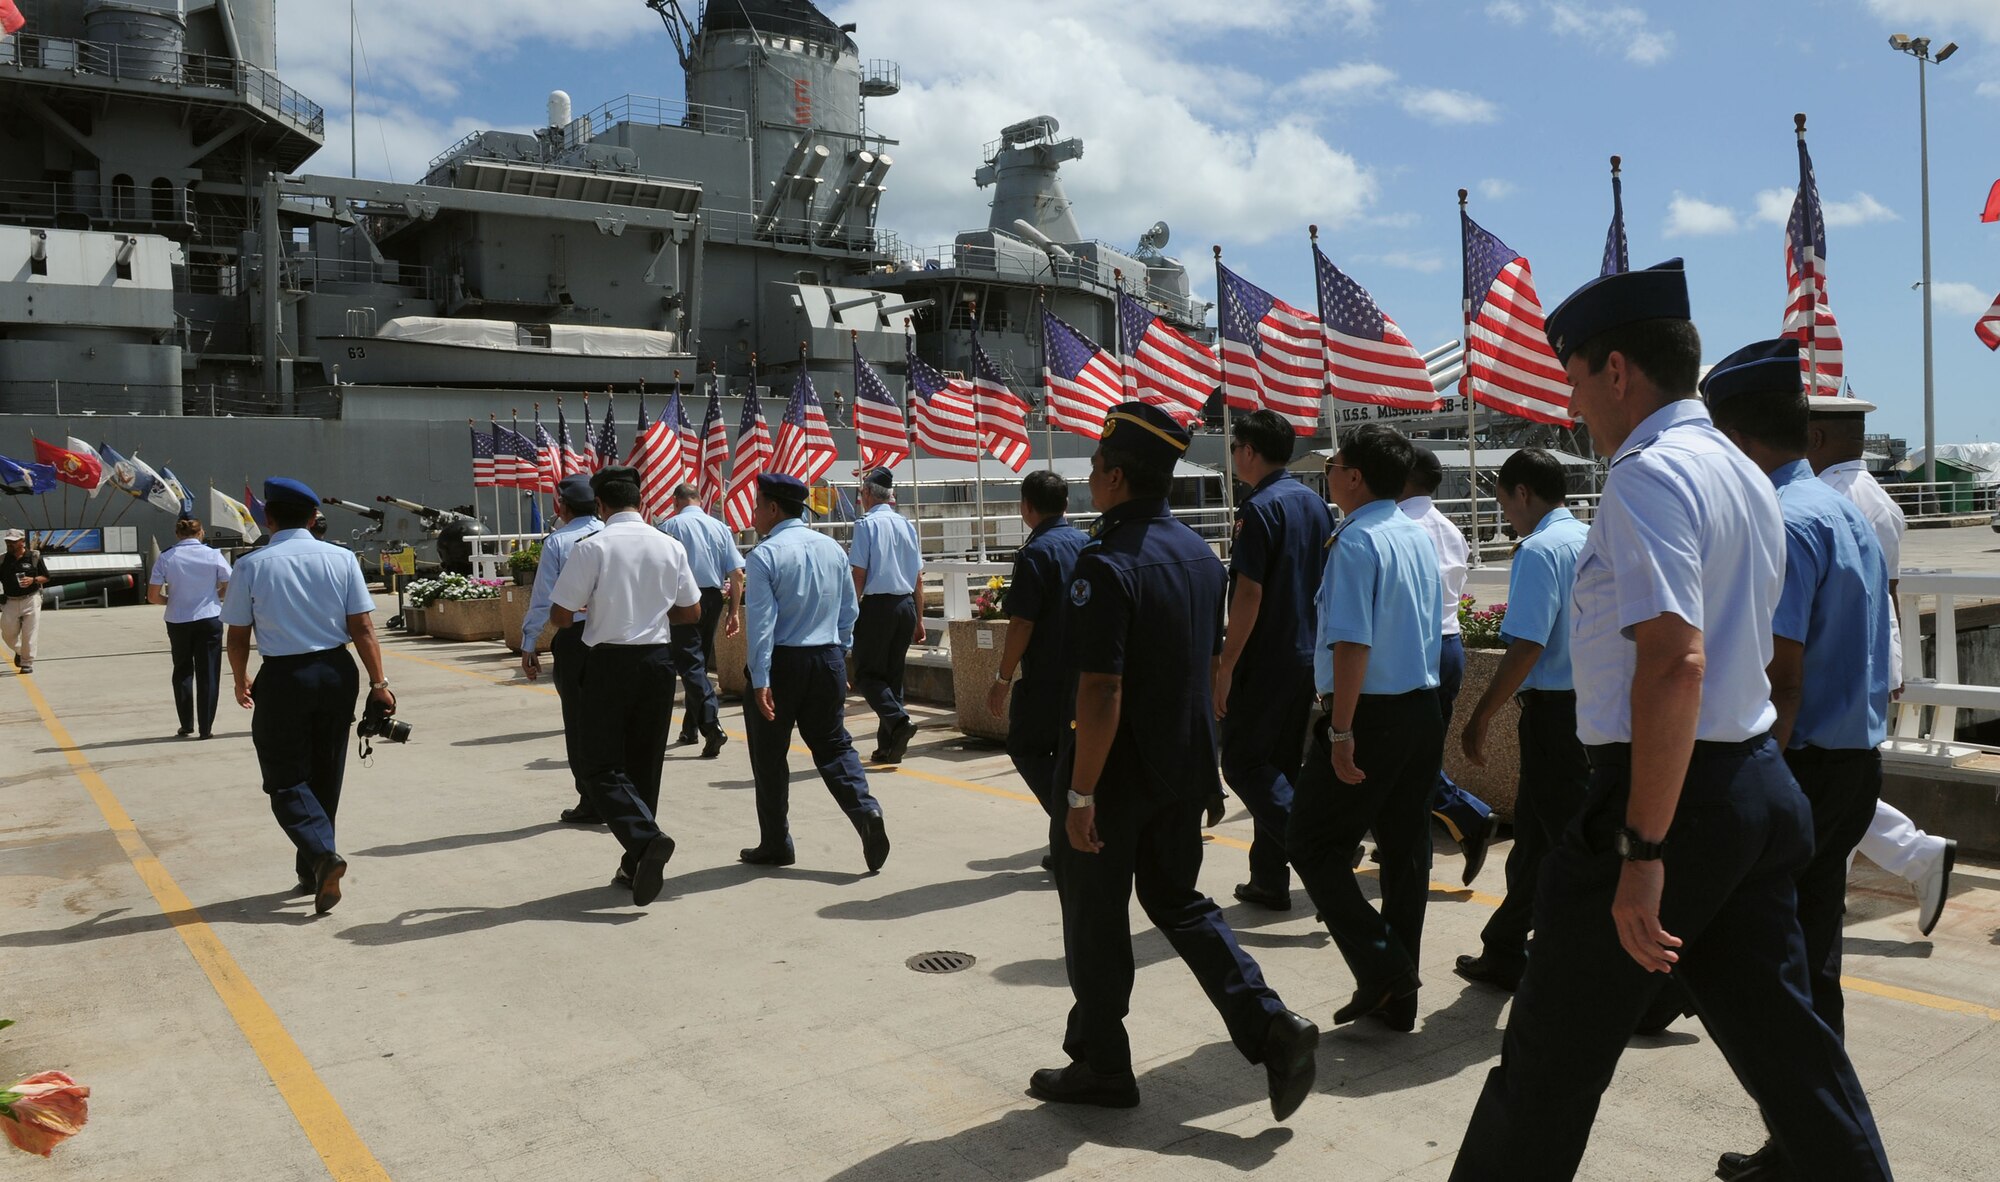 Pacific Rim Airpower Symposium attendees enter the USS Battleship Missouri Memorial during a tour of Pearl Harbor historic sites Sept. 22, 2015, in Honolulu, Hawaii. Senior officer and enlisted airmen from nations throughout the Indo-Asia-Pacific region attended the symposium to discuss ways to improve cooperation, leadership and coordination efforts. (U.S. Air Force photo by Staff Sgt. Alexander Martinez/Released)